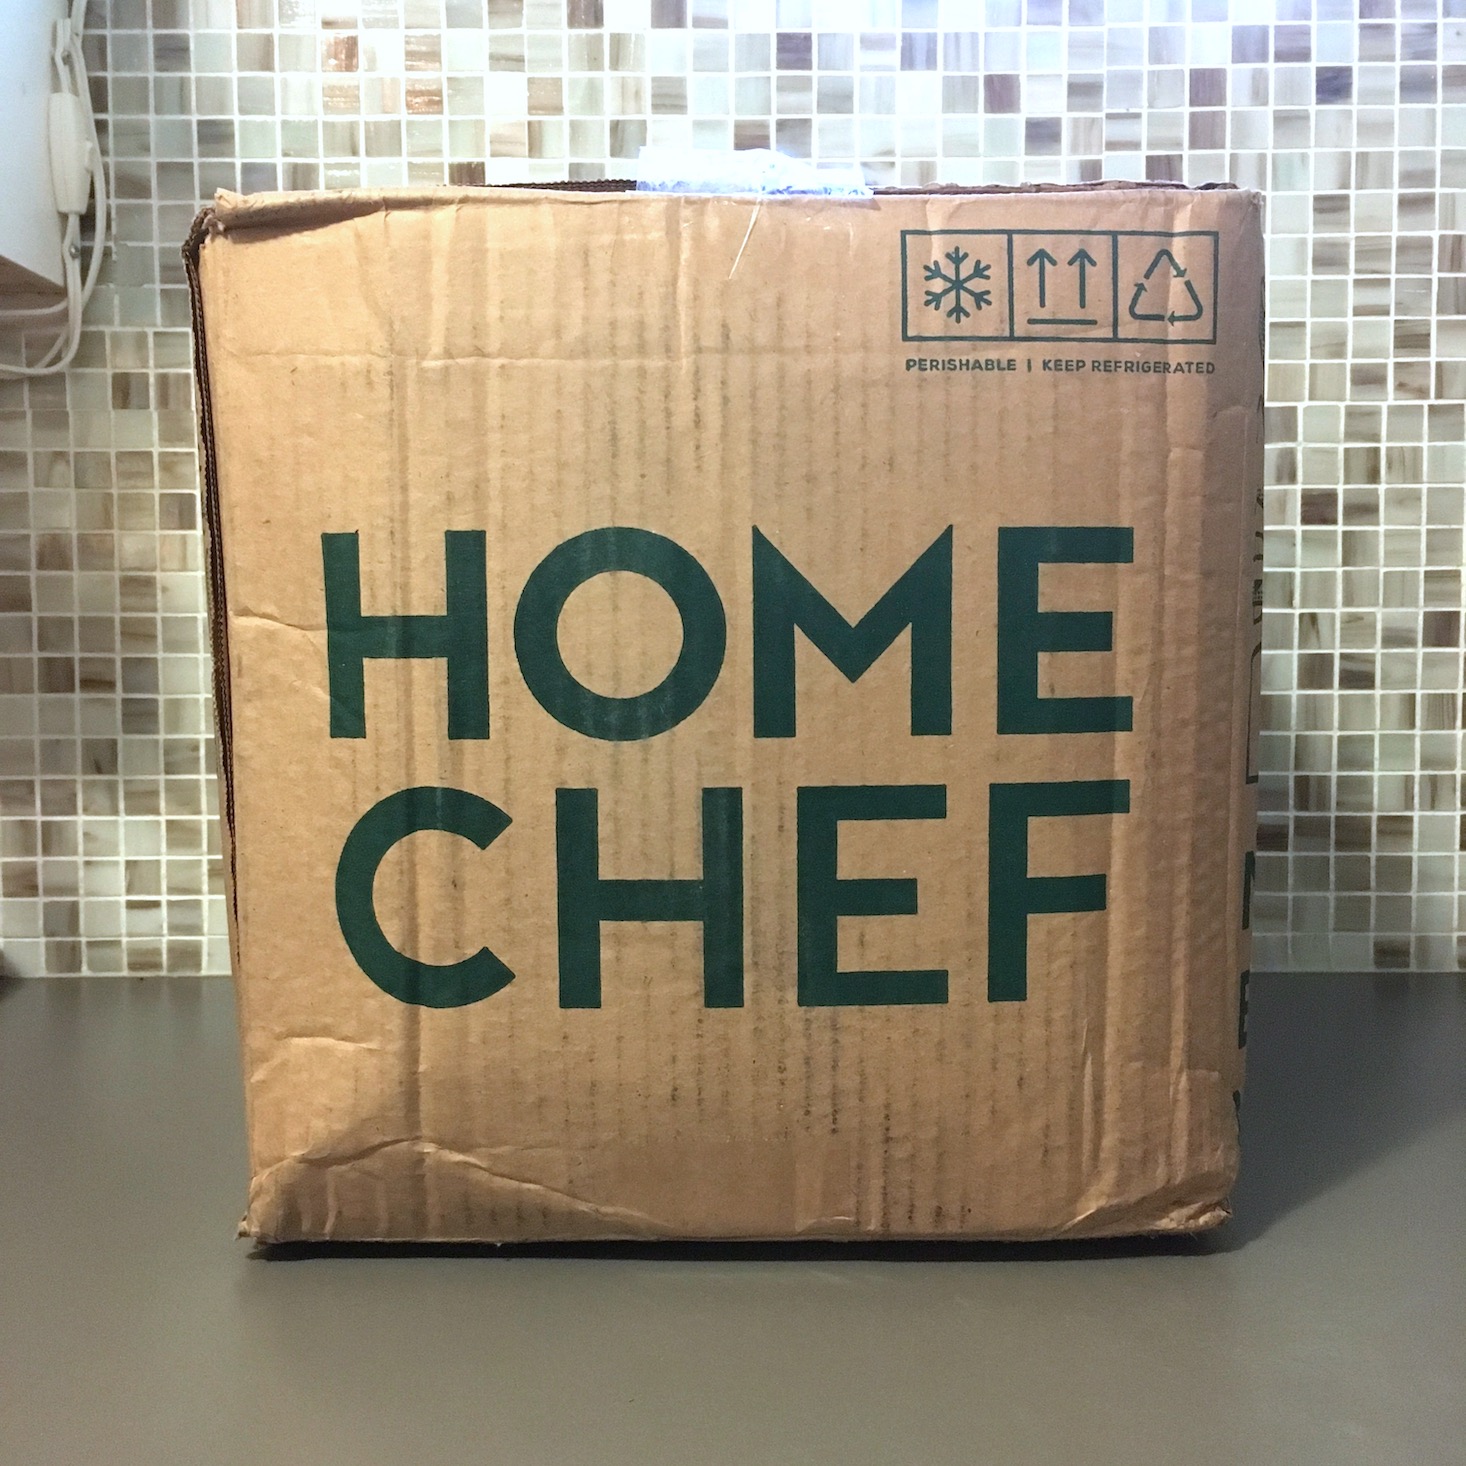 Home Chef Meal Kit Review + Coupon – June 2020